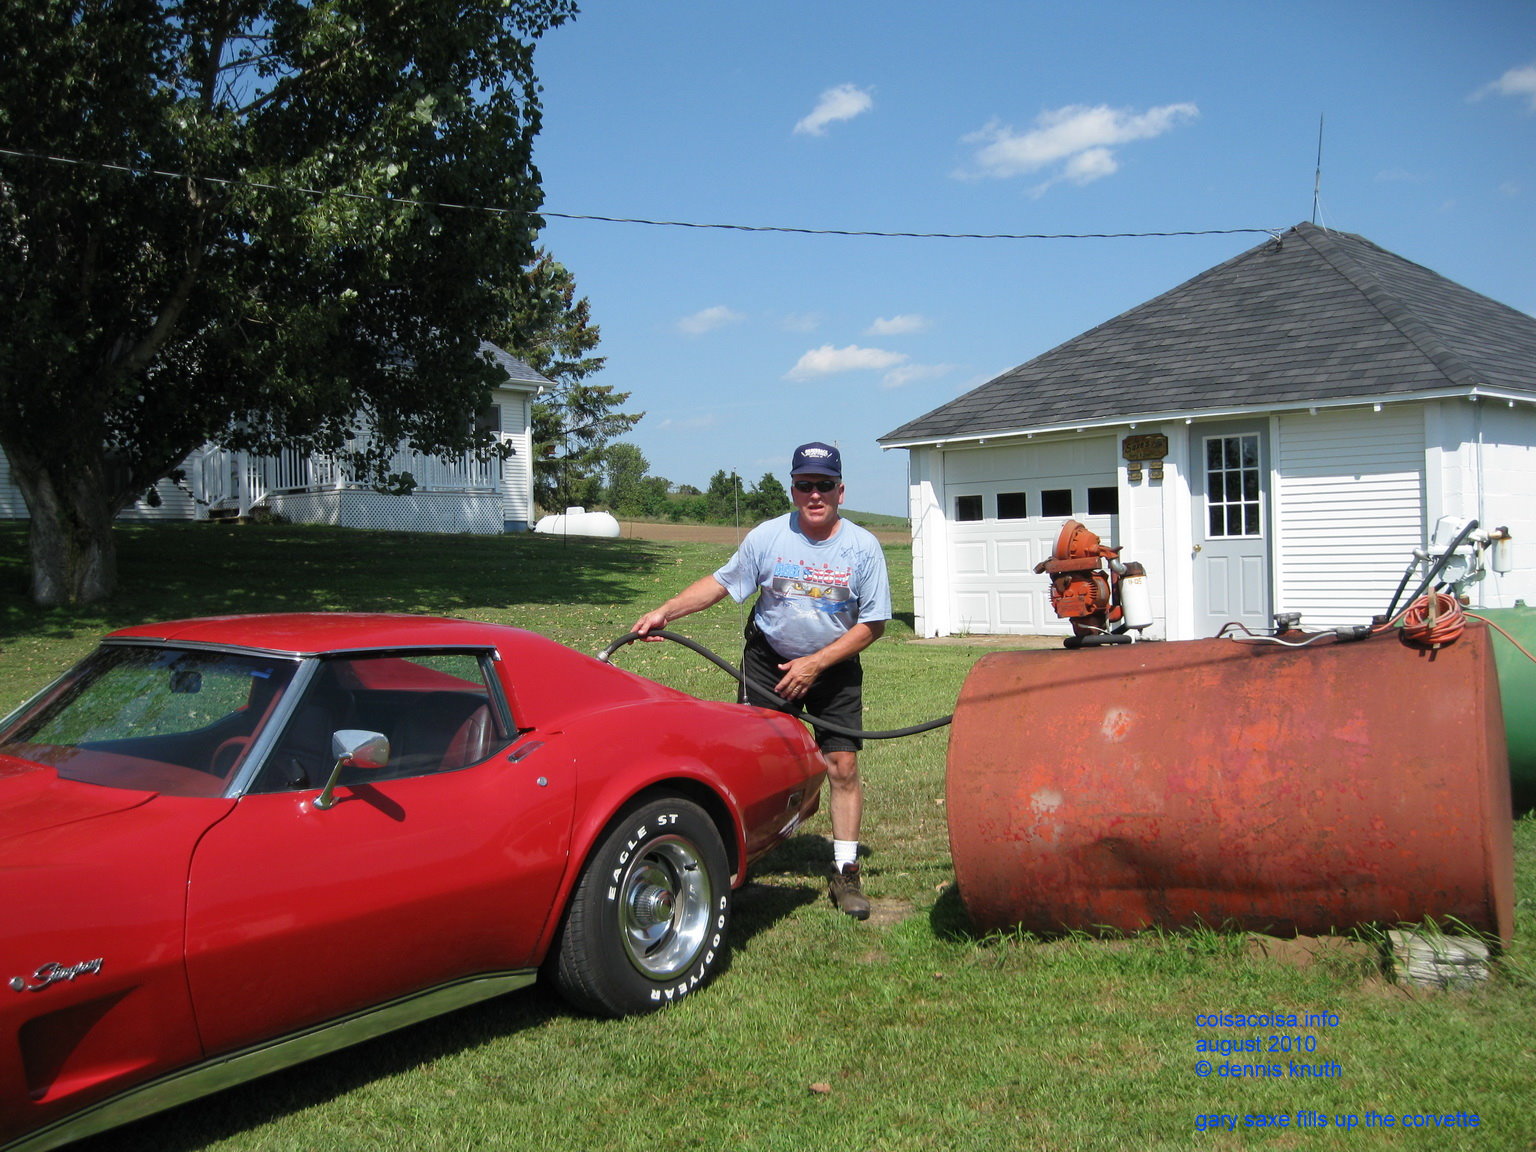 Gary Saxe fills up the Corvette for Justin